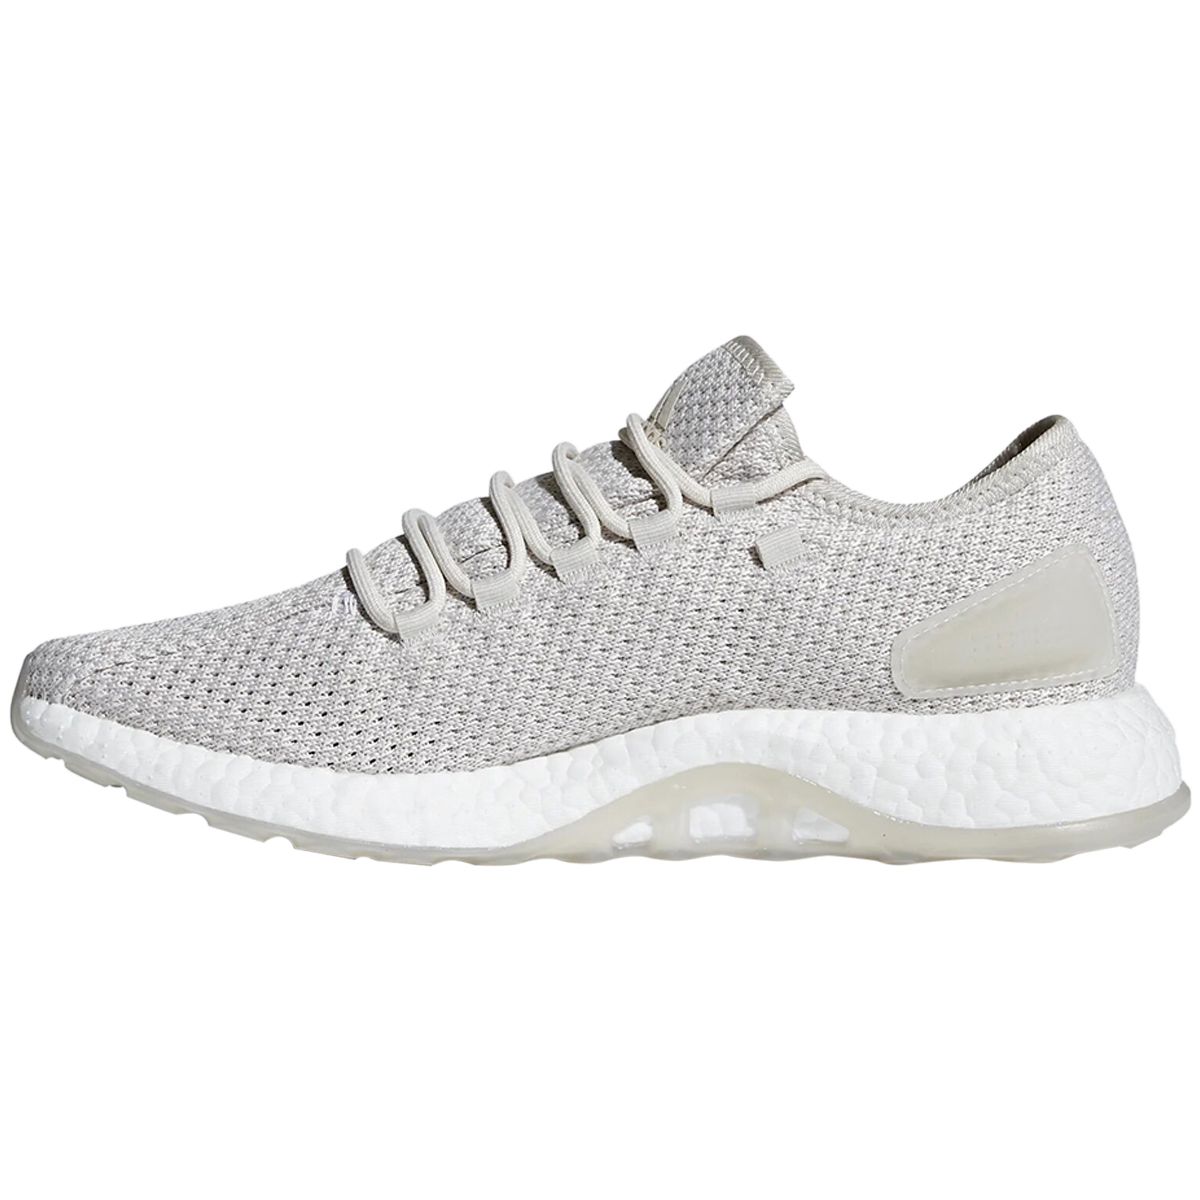 adidas pure boost clima by8895